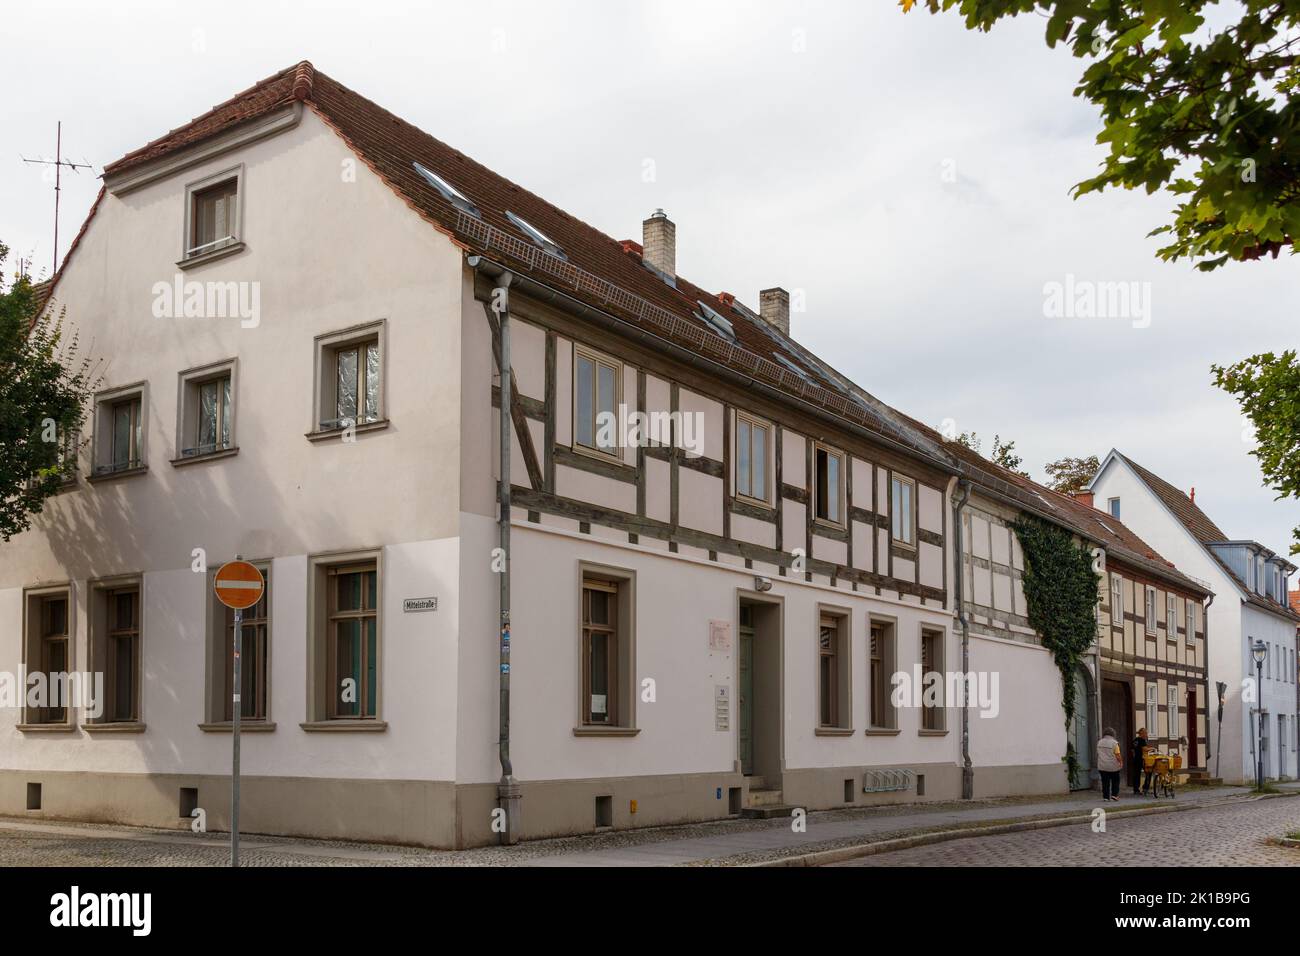 Nauen, a town in Brandeburg Germany Stock Photo